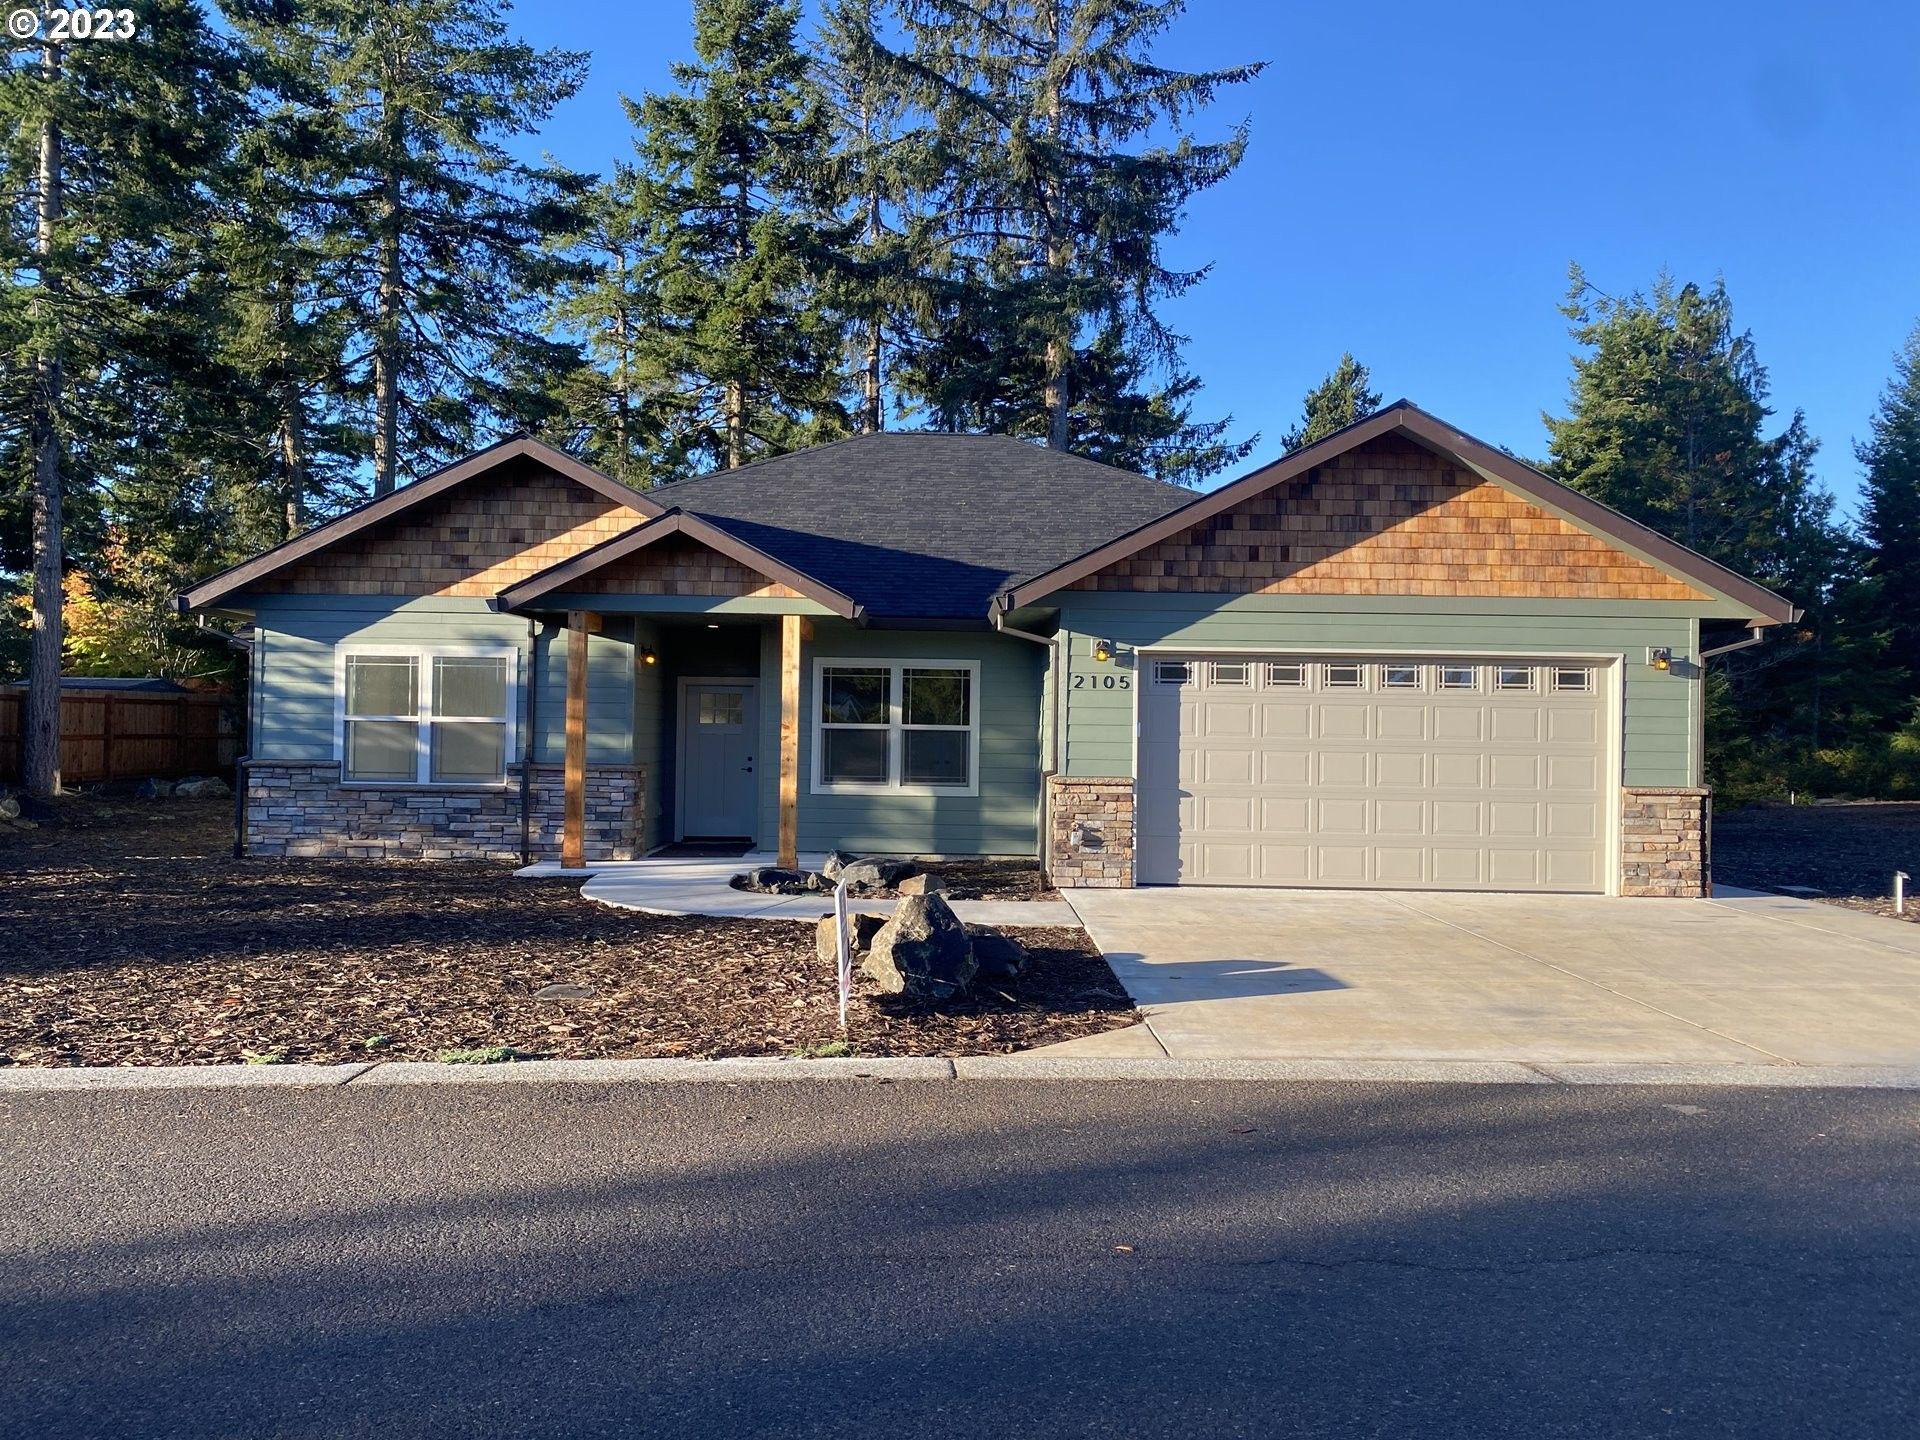 2105 Willow Loop. Florence, OR 97439